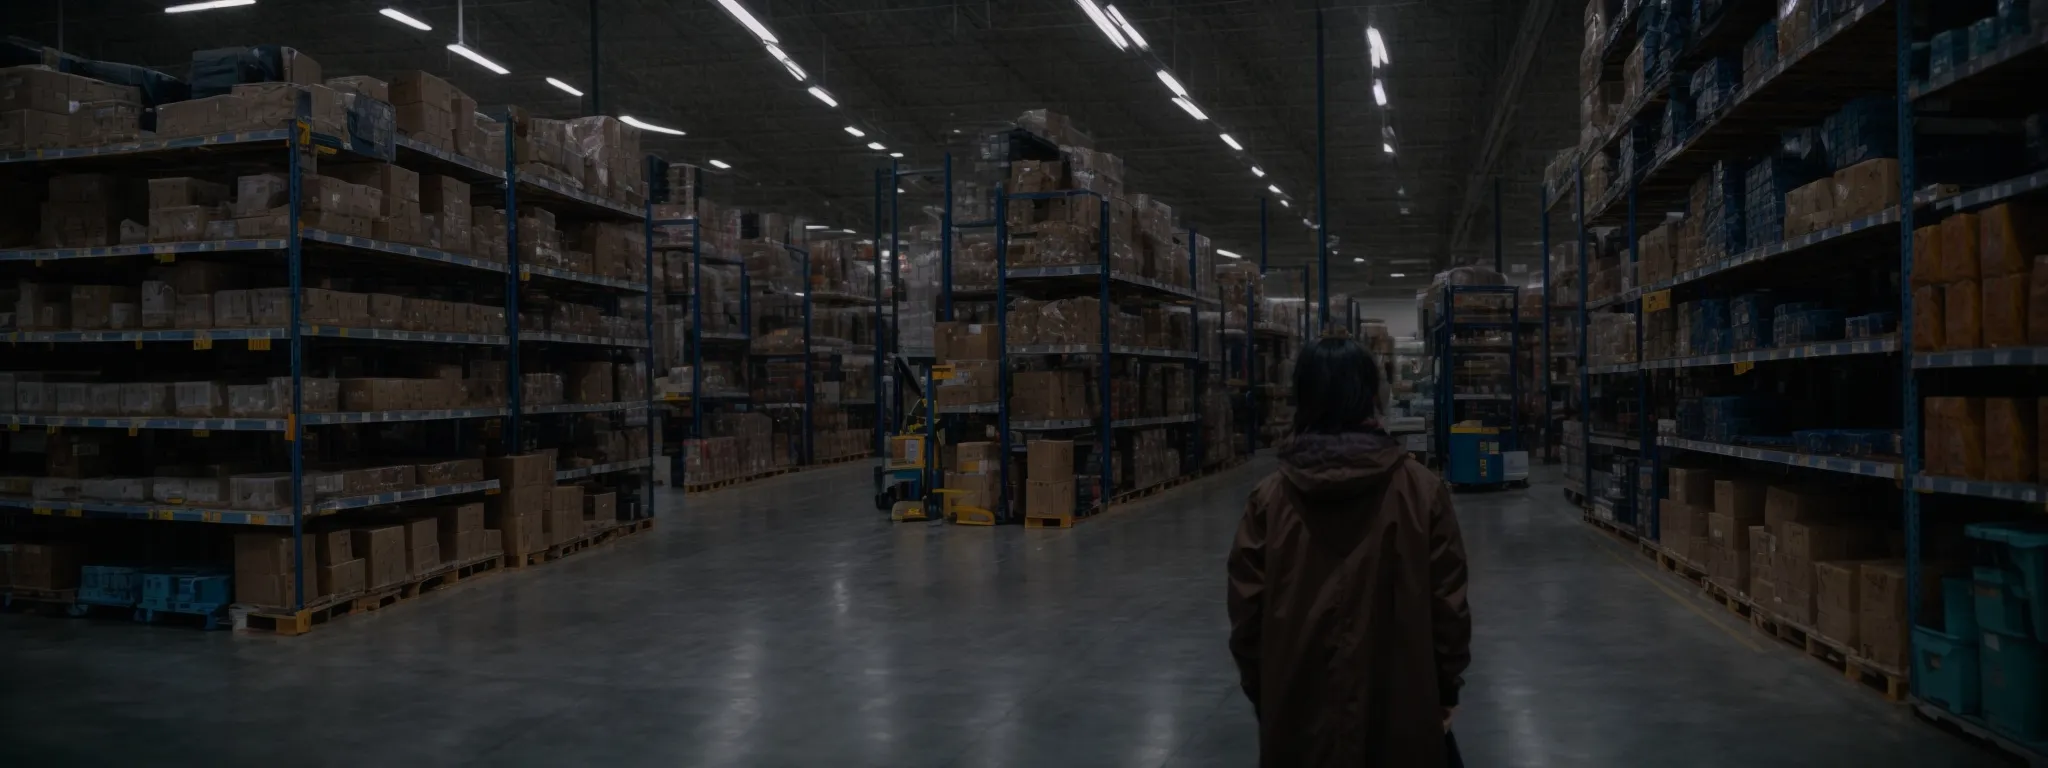 a person standing in a large, orderly warehouse, with clear aisle signs indicating different product categories.